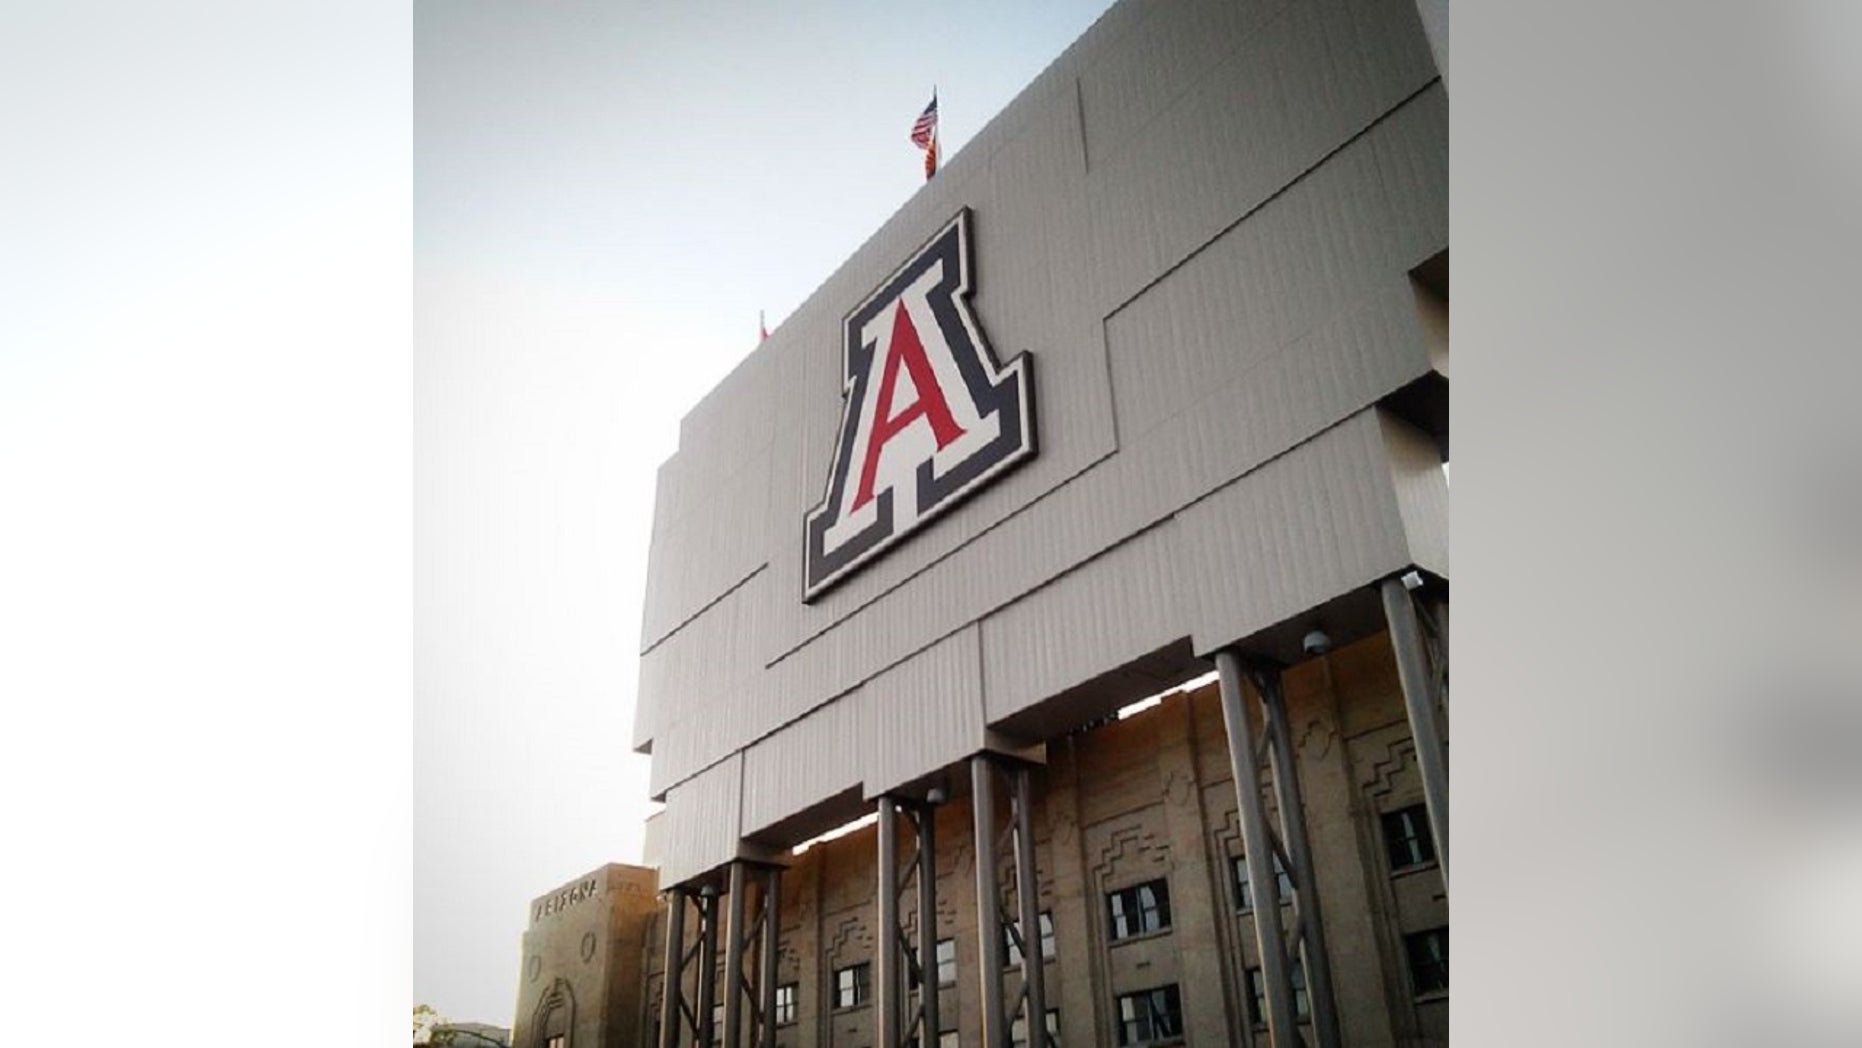 Dozens of professors from the University of Arizona have asked the school to drop criminal charges against two students who had protested against the visit of agents of the University of Arizona border patrol.